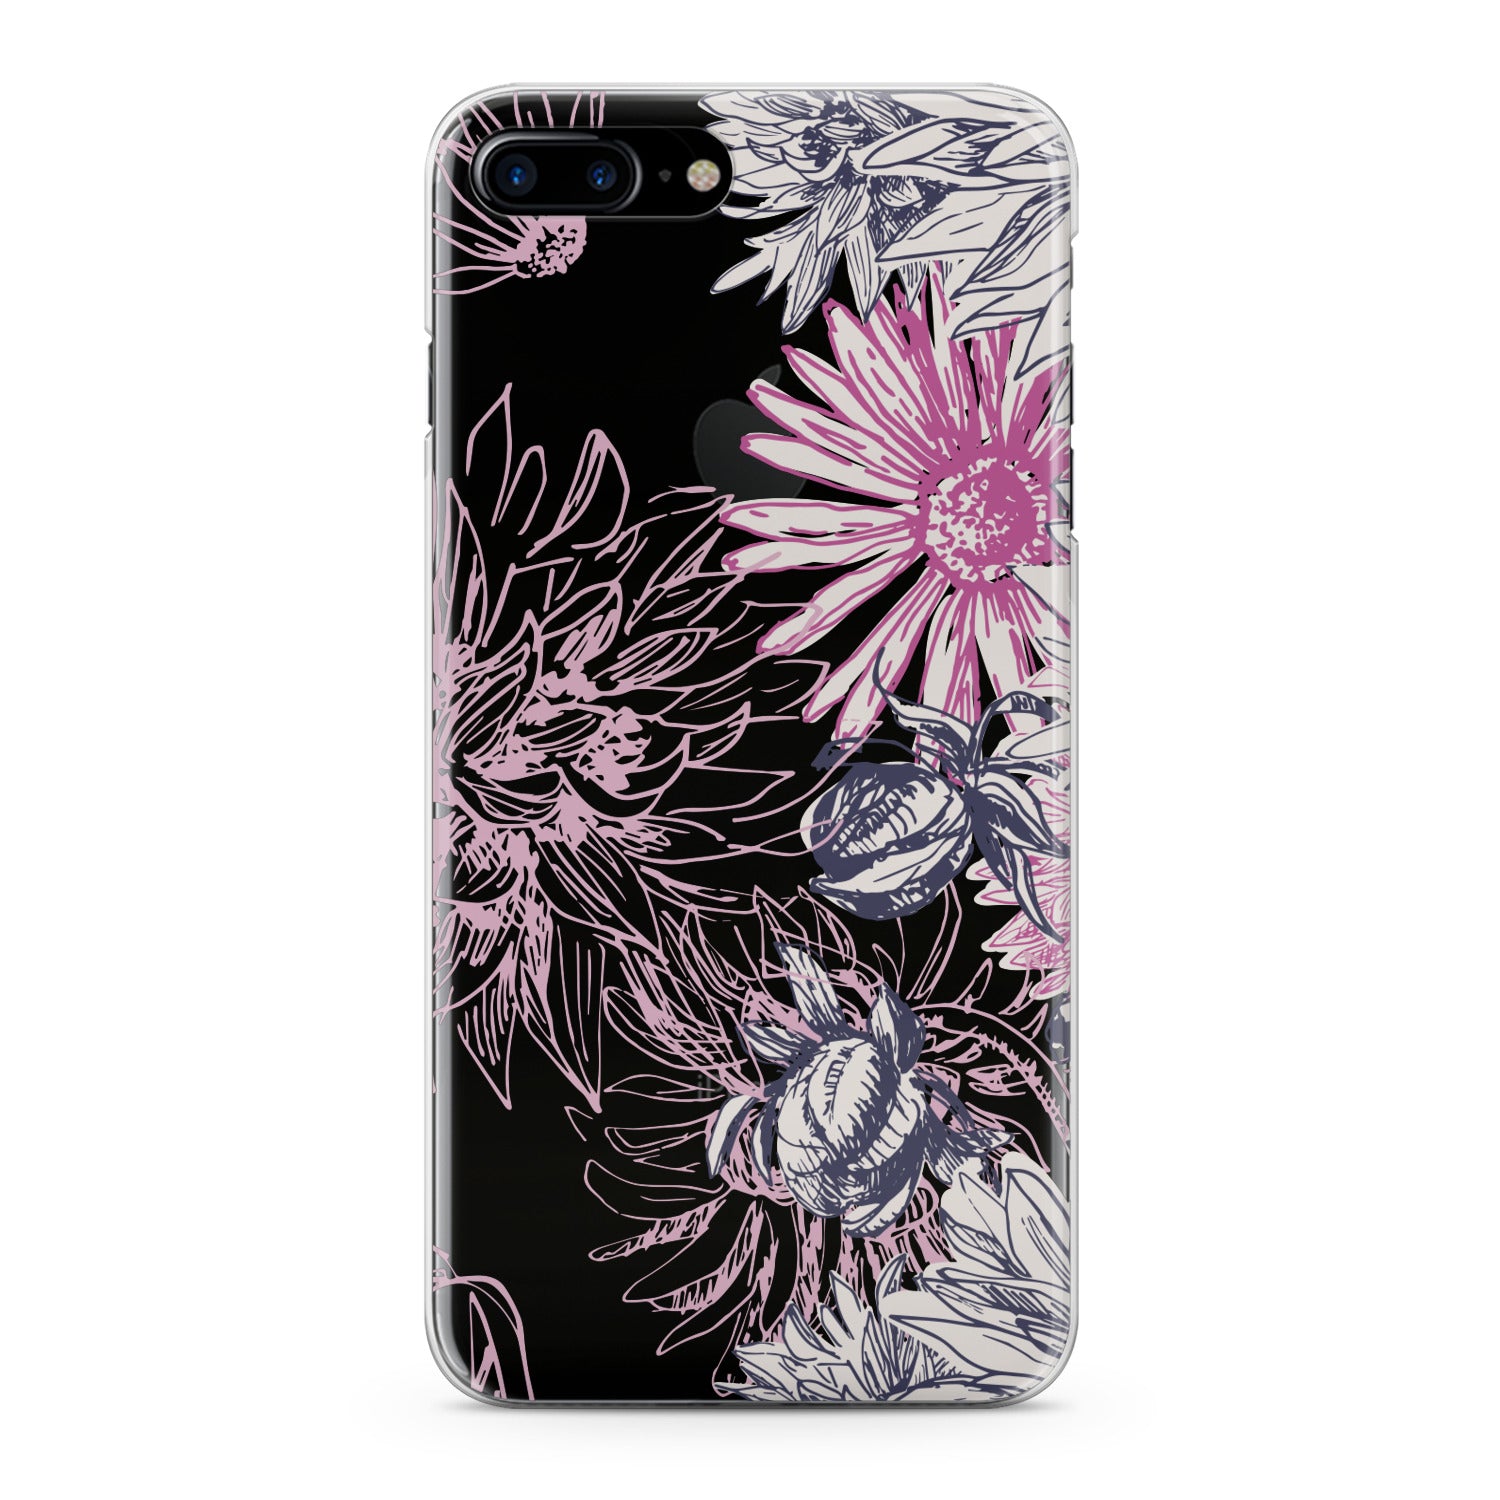 Lex Altern Pink Chrysanthemum Print Phone Case for your iPhone & Android phone.